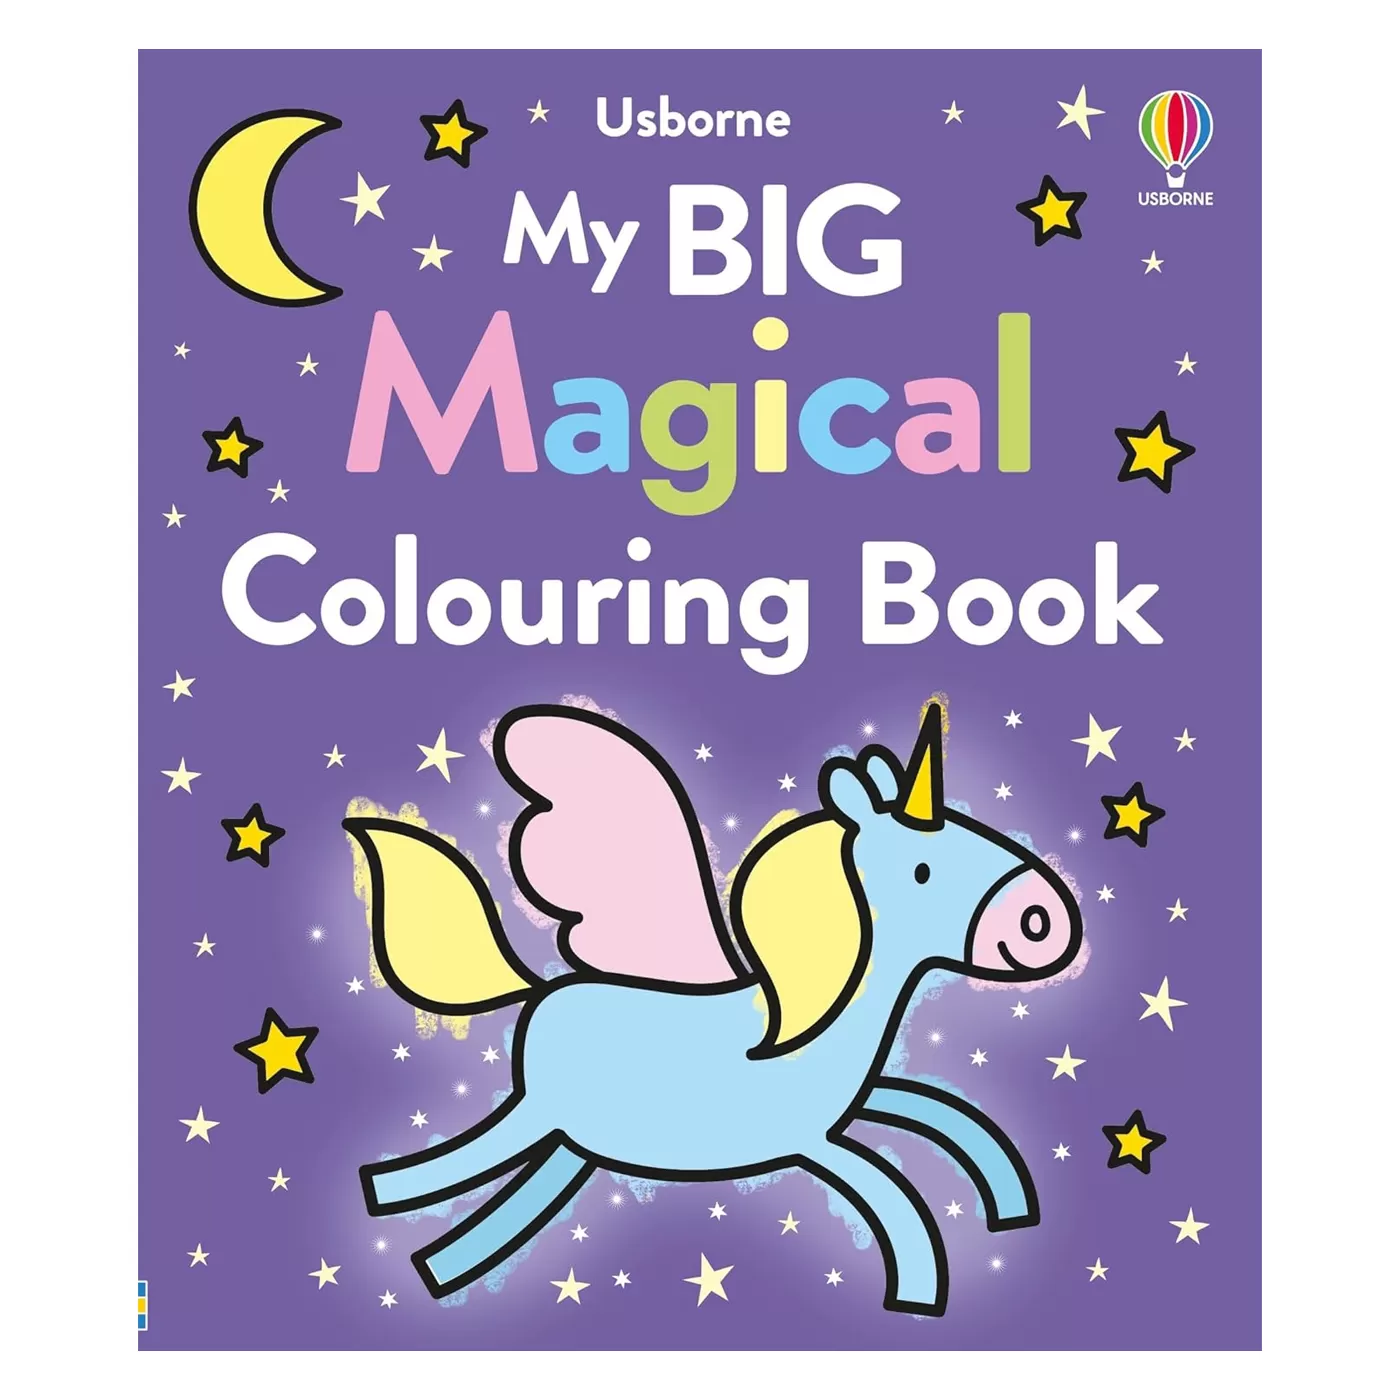  My Big Magical Colouring Book